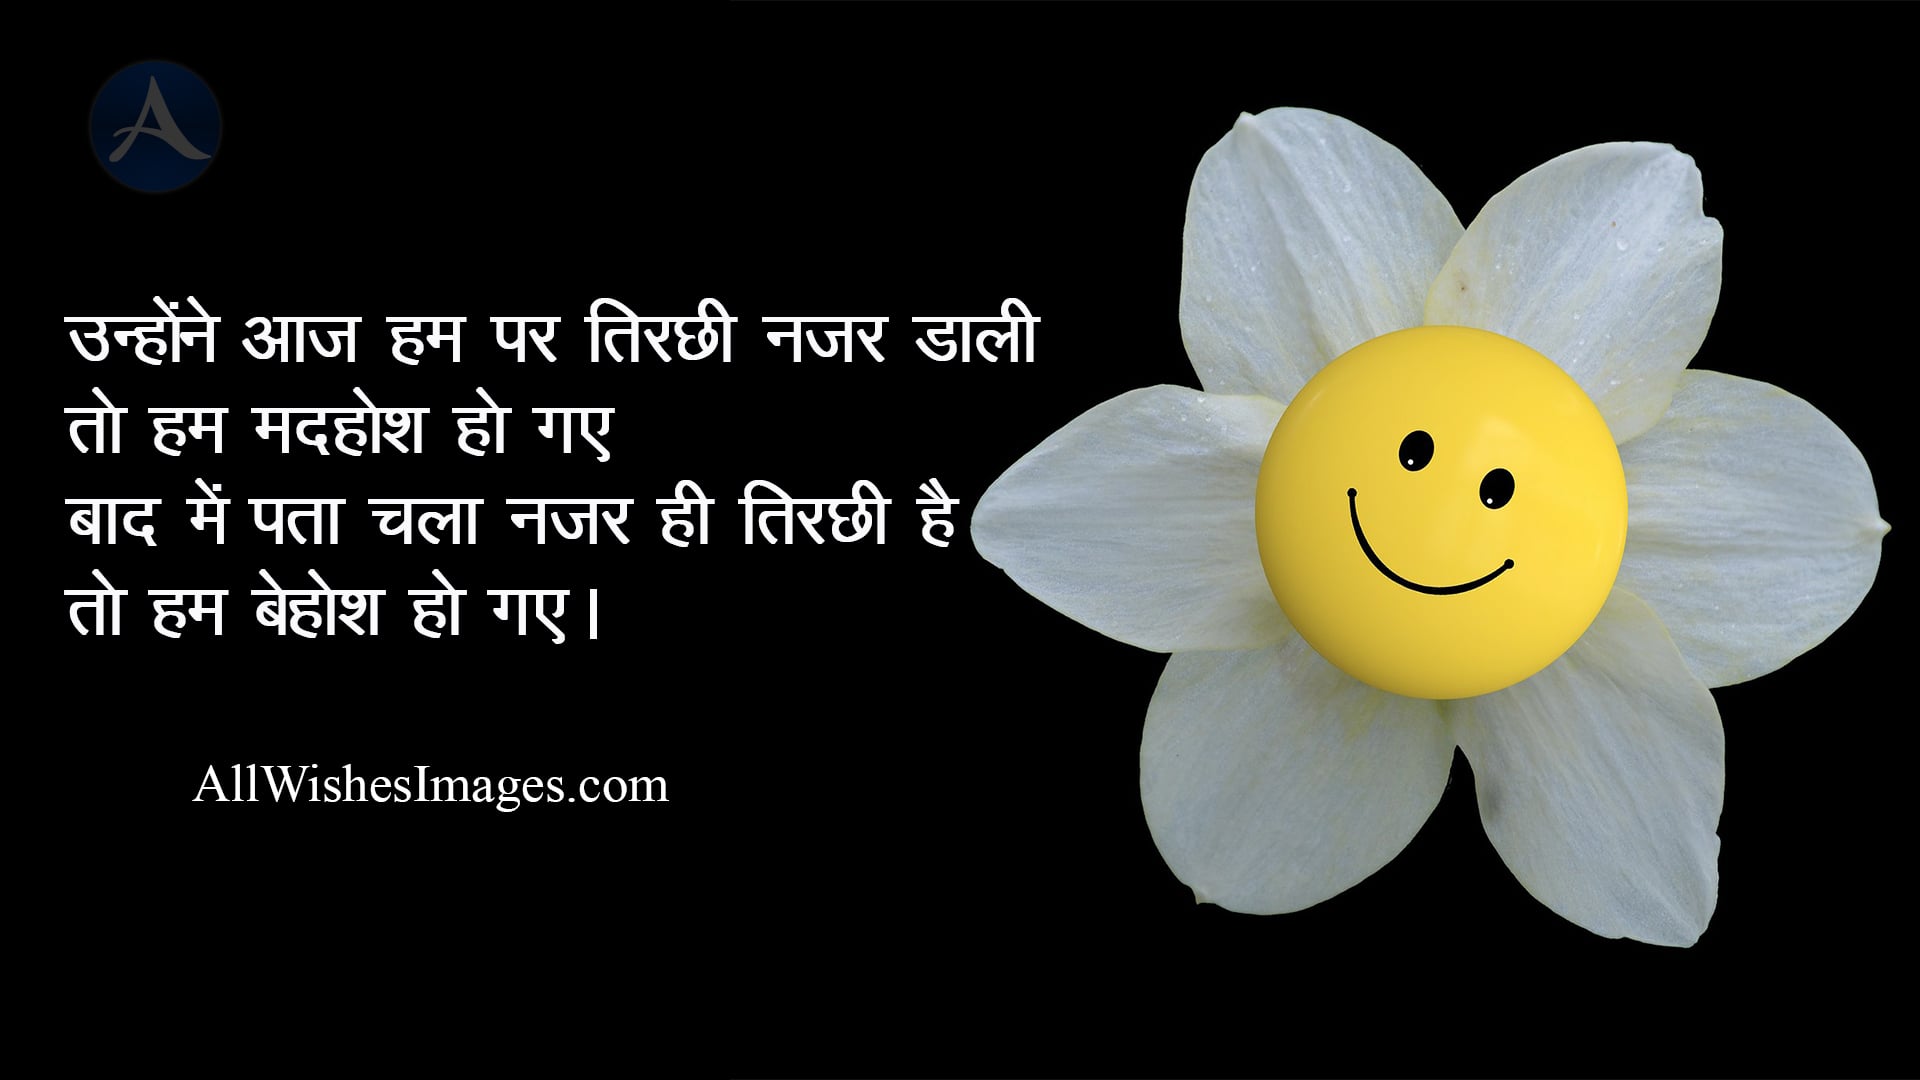 Funny Shayari In Hindi For Friends With Images - All Wishes Images - Images  for WhatsApp